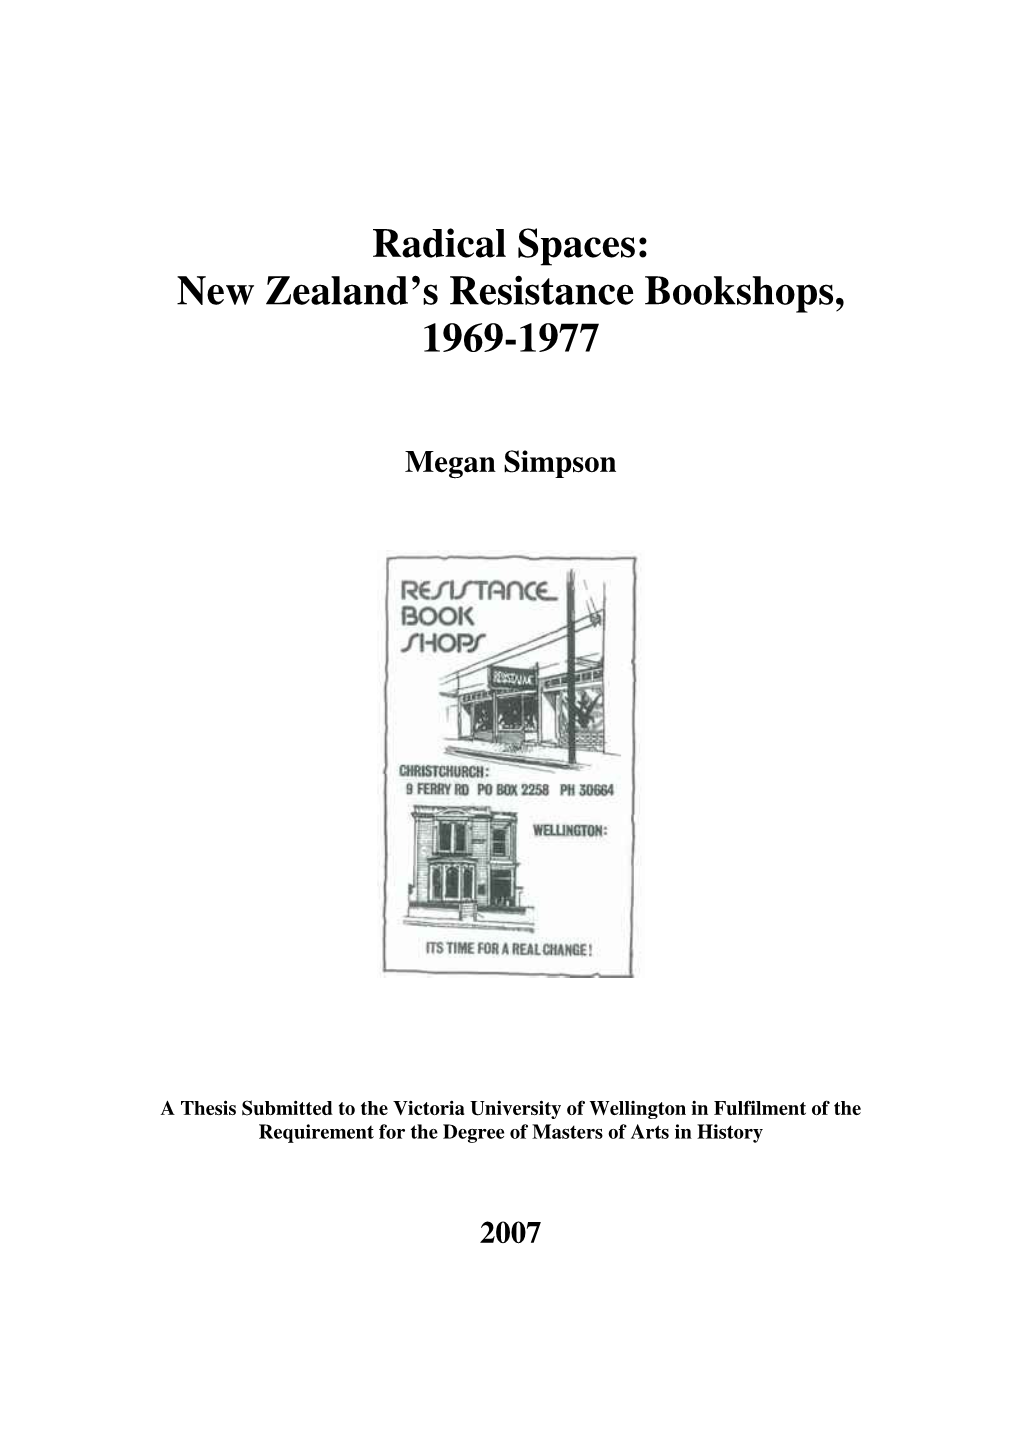 Radical Spaces: New Zealand's Resistance Bookshops, 1969-1977